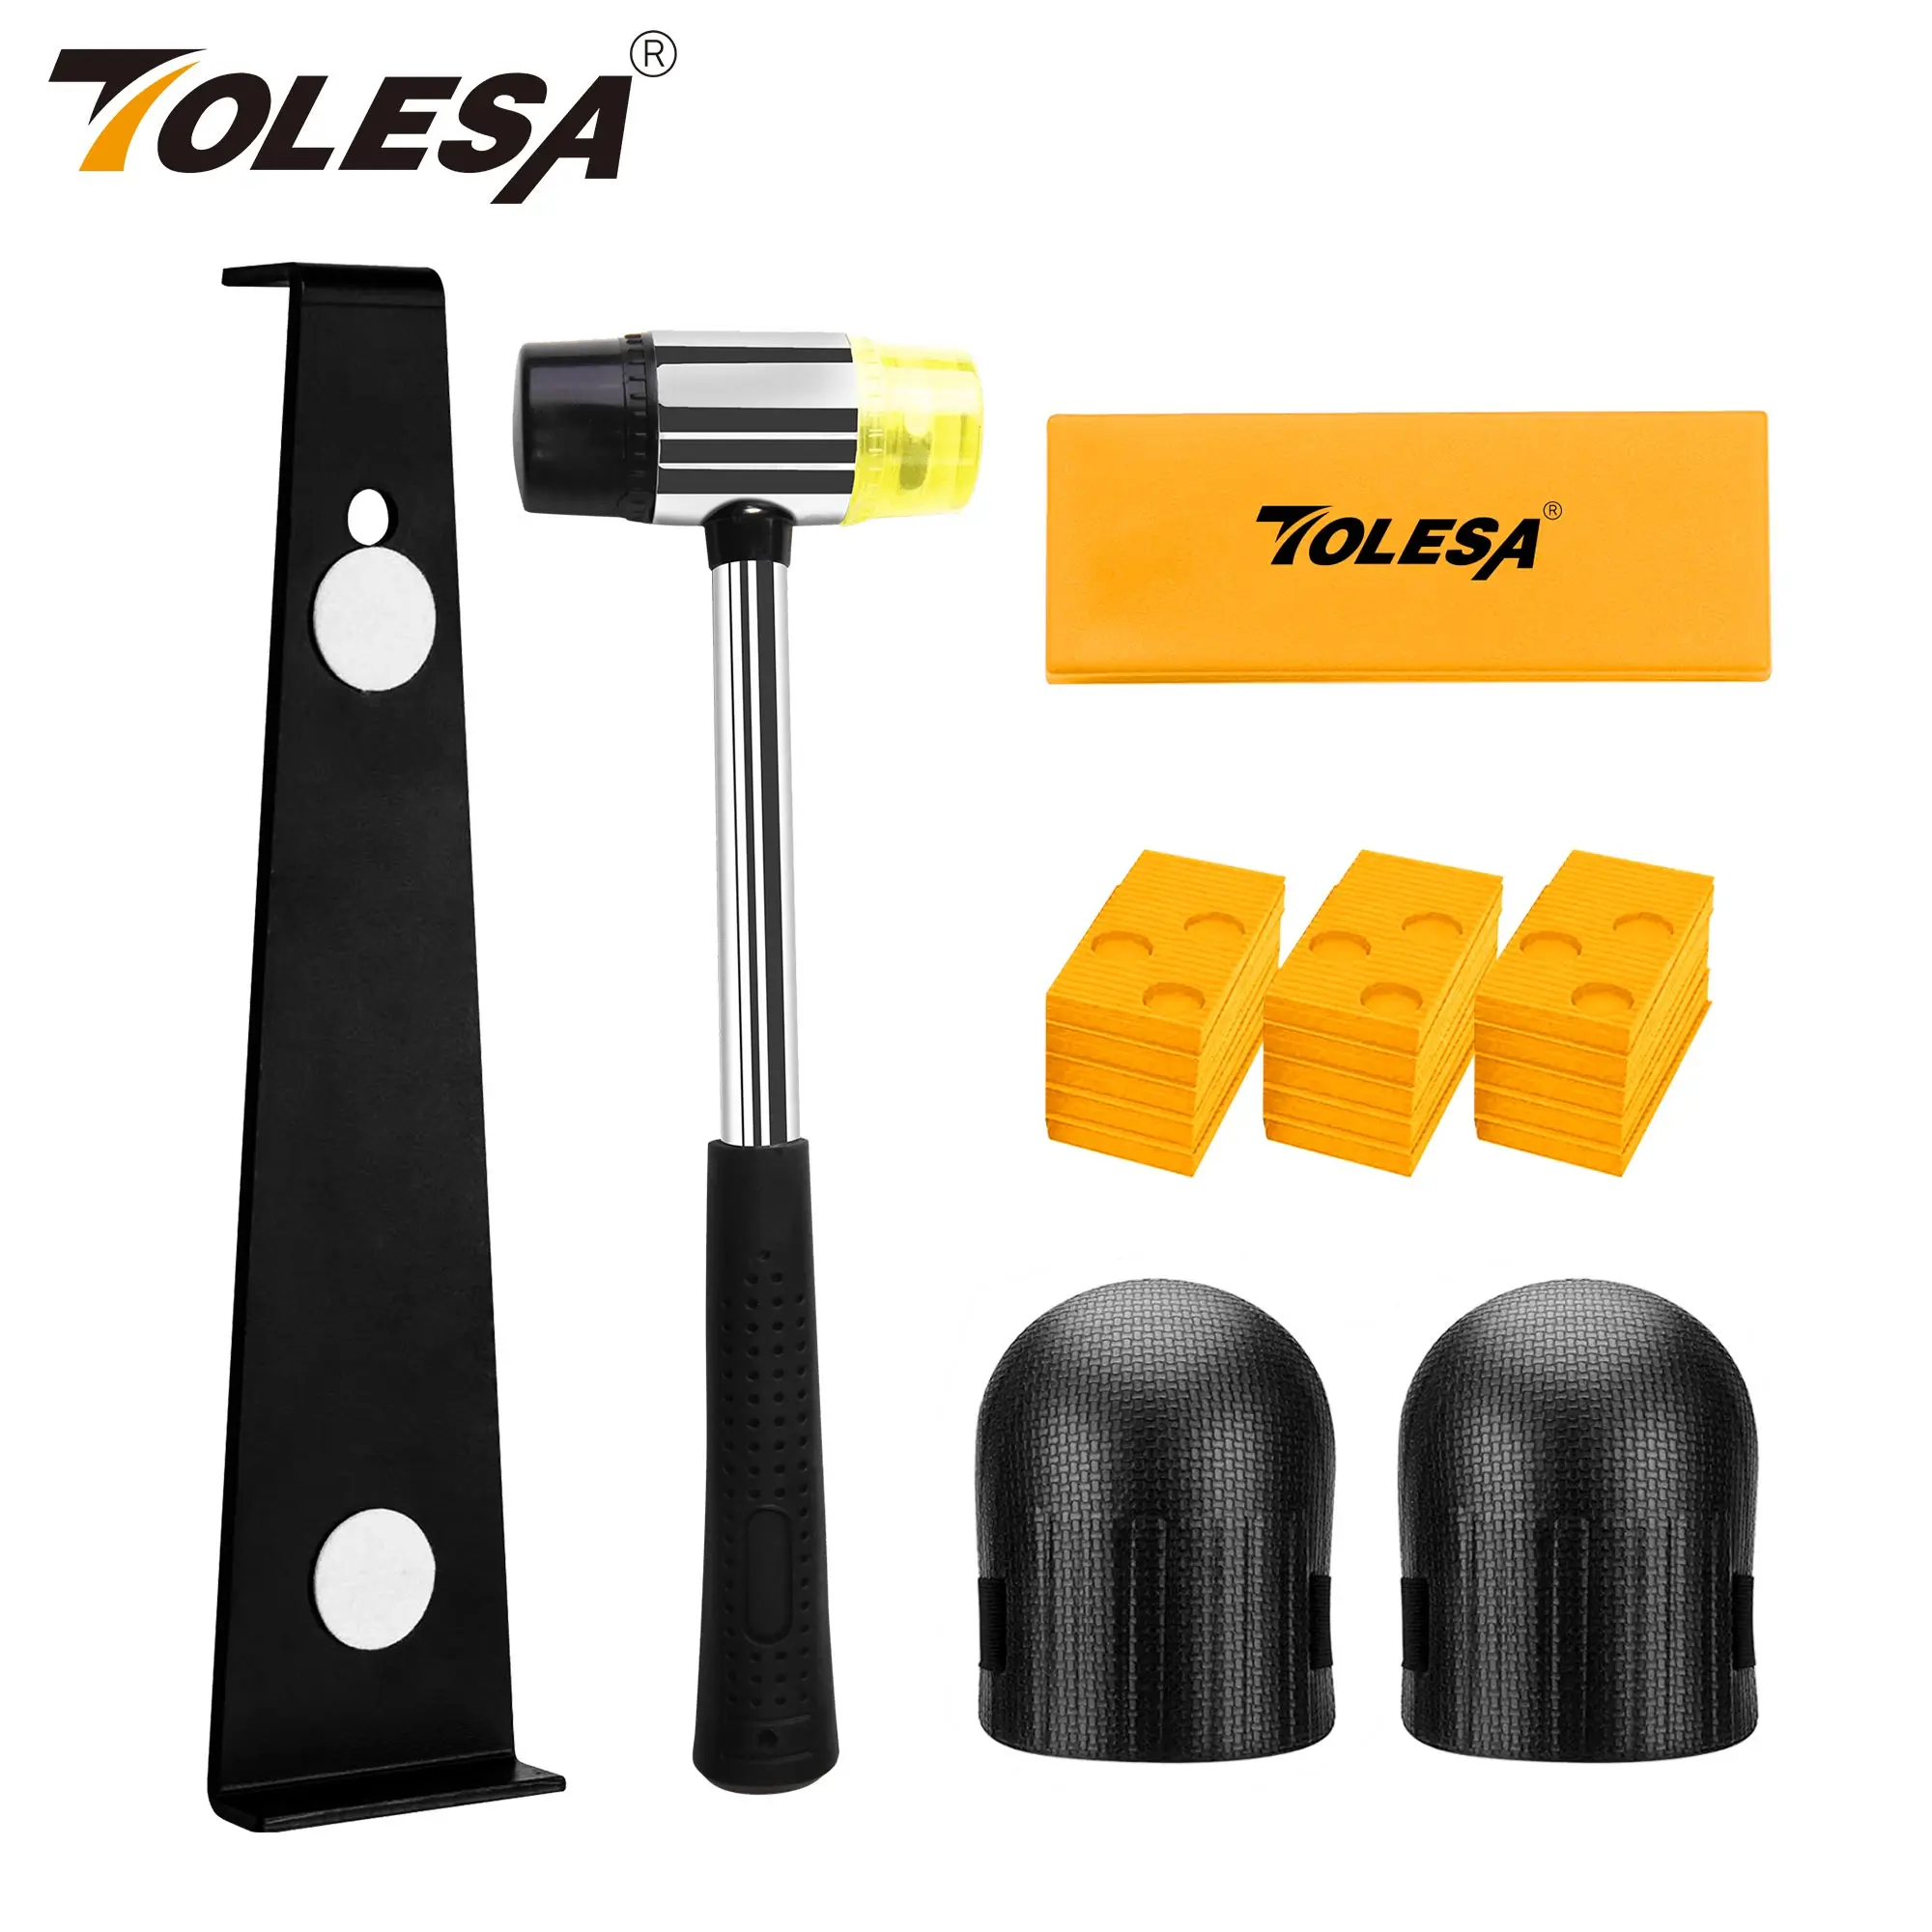 TOLESA Laminate Wood Flooring Installation Kit Vinyl Tools with 30 Spacers, Pull Bar,Tapping Block,Double Faced Mallet,Knee Pads